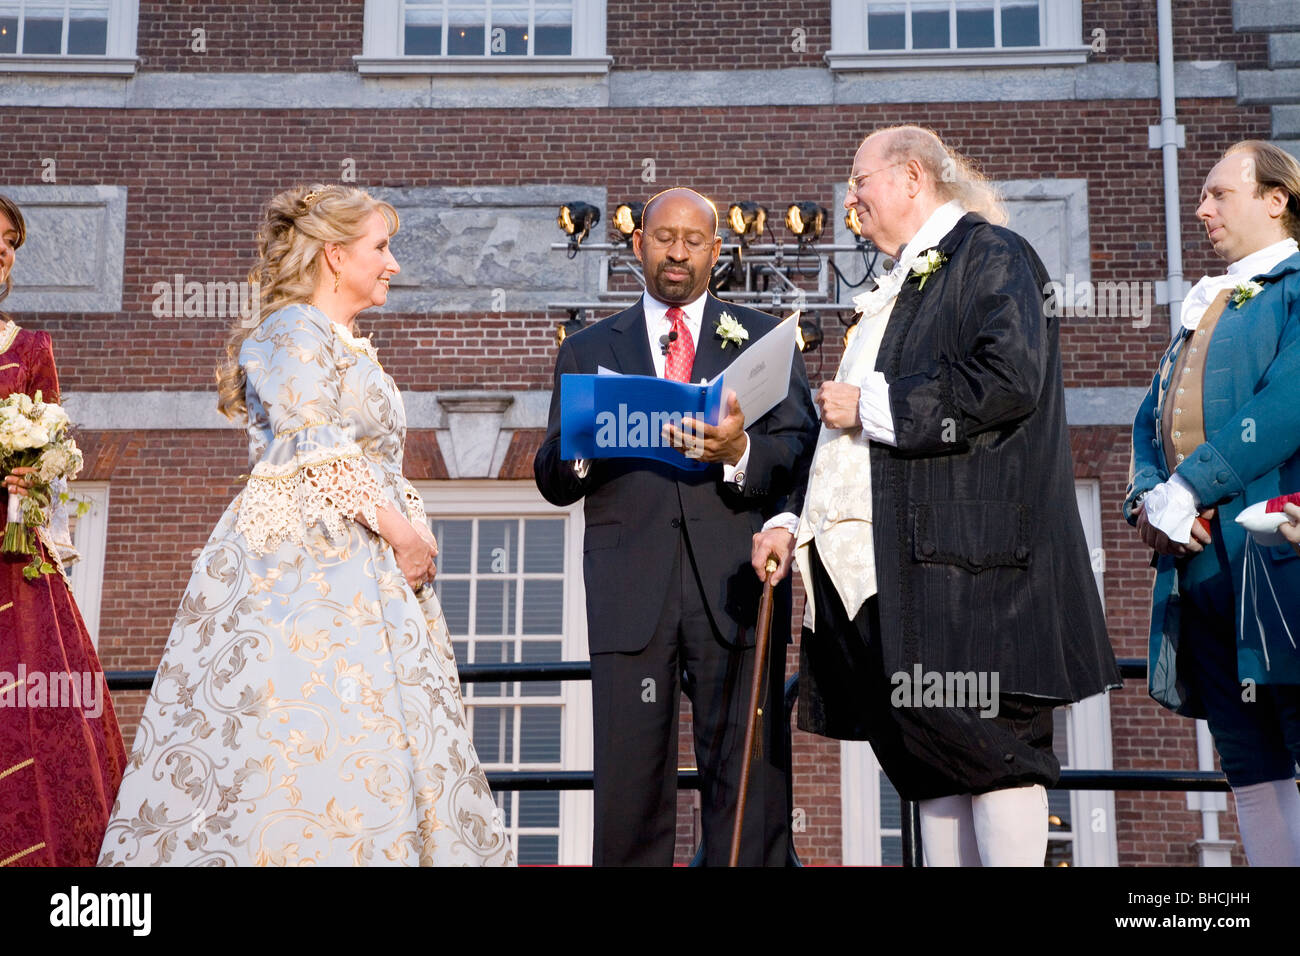 Philadelphia Mayor Michael Nutter marrying Ben Franklin and Betsy Ross on July 3, 2008 in front of Independence Hall Stock Photo